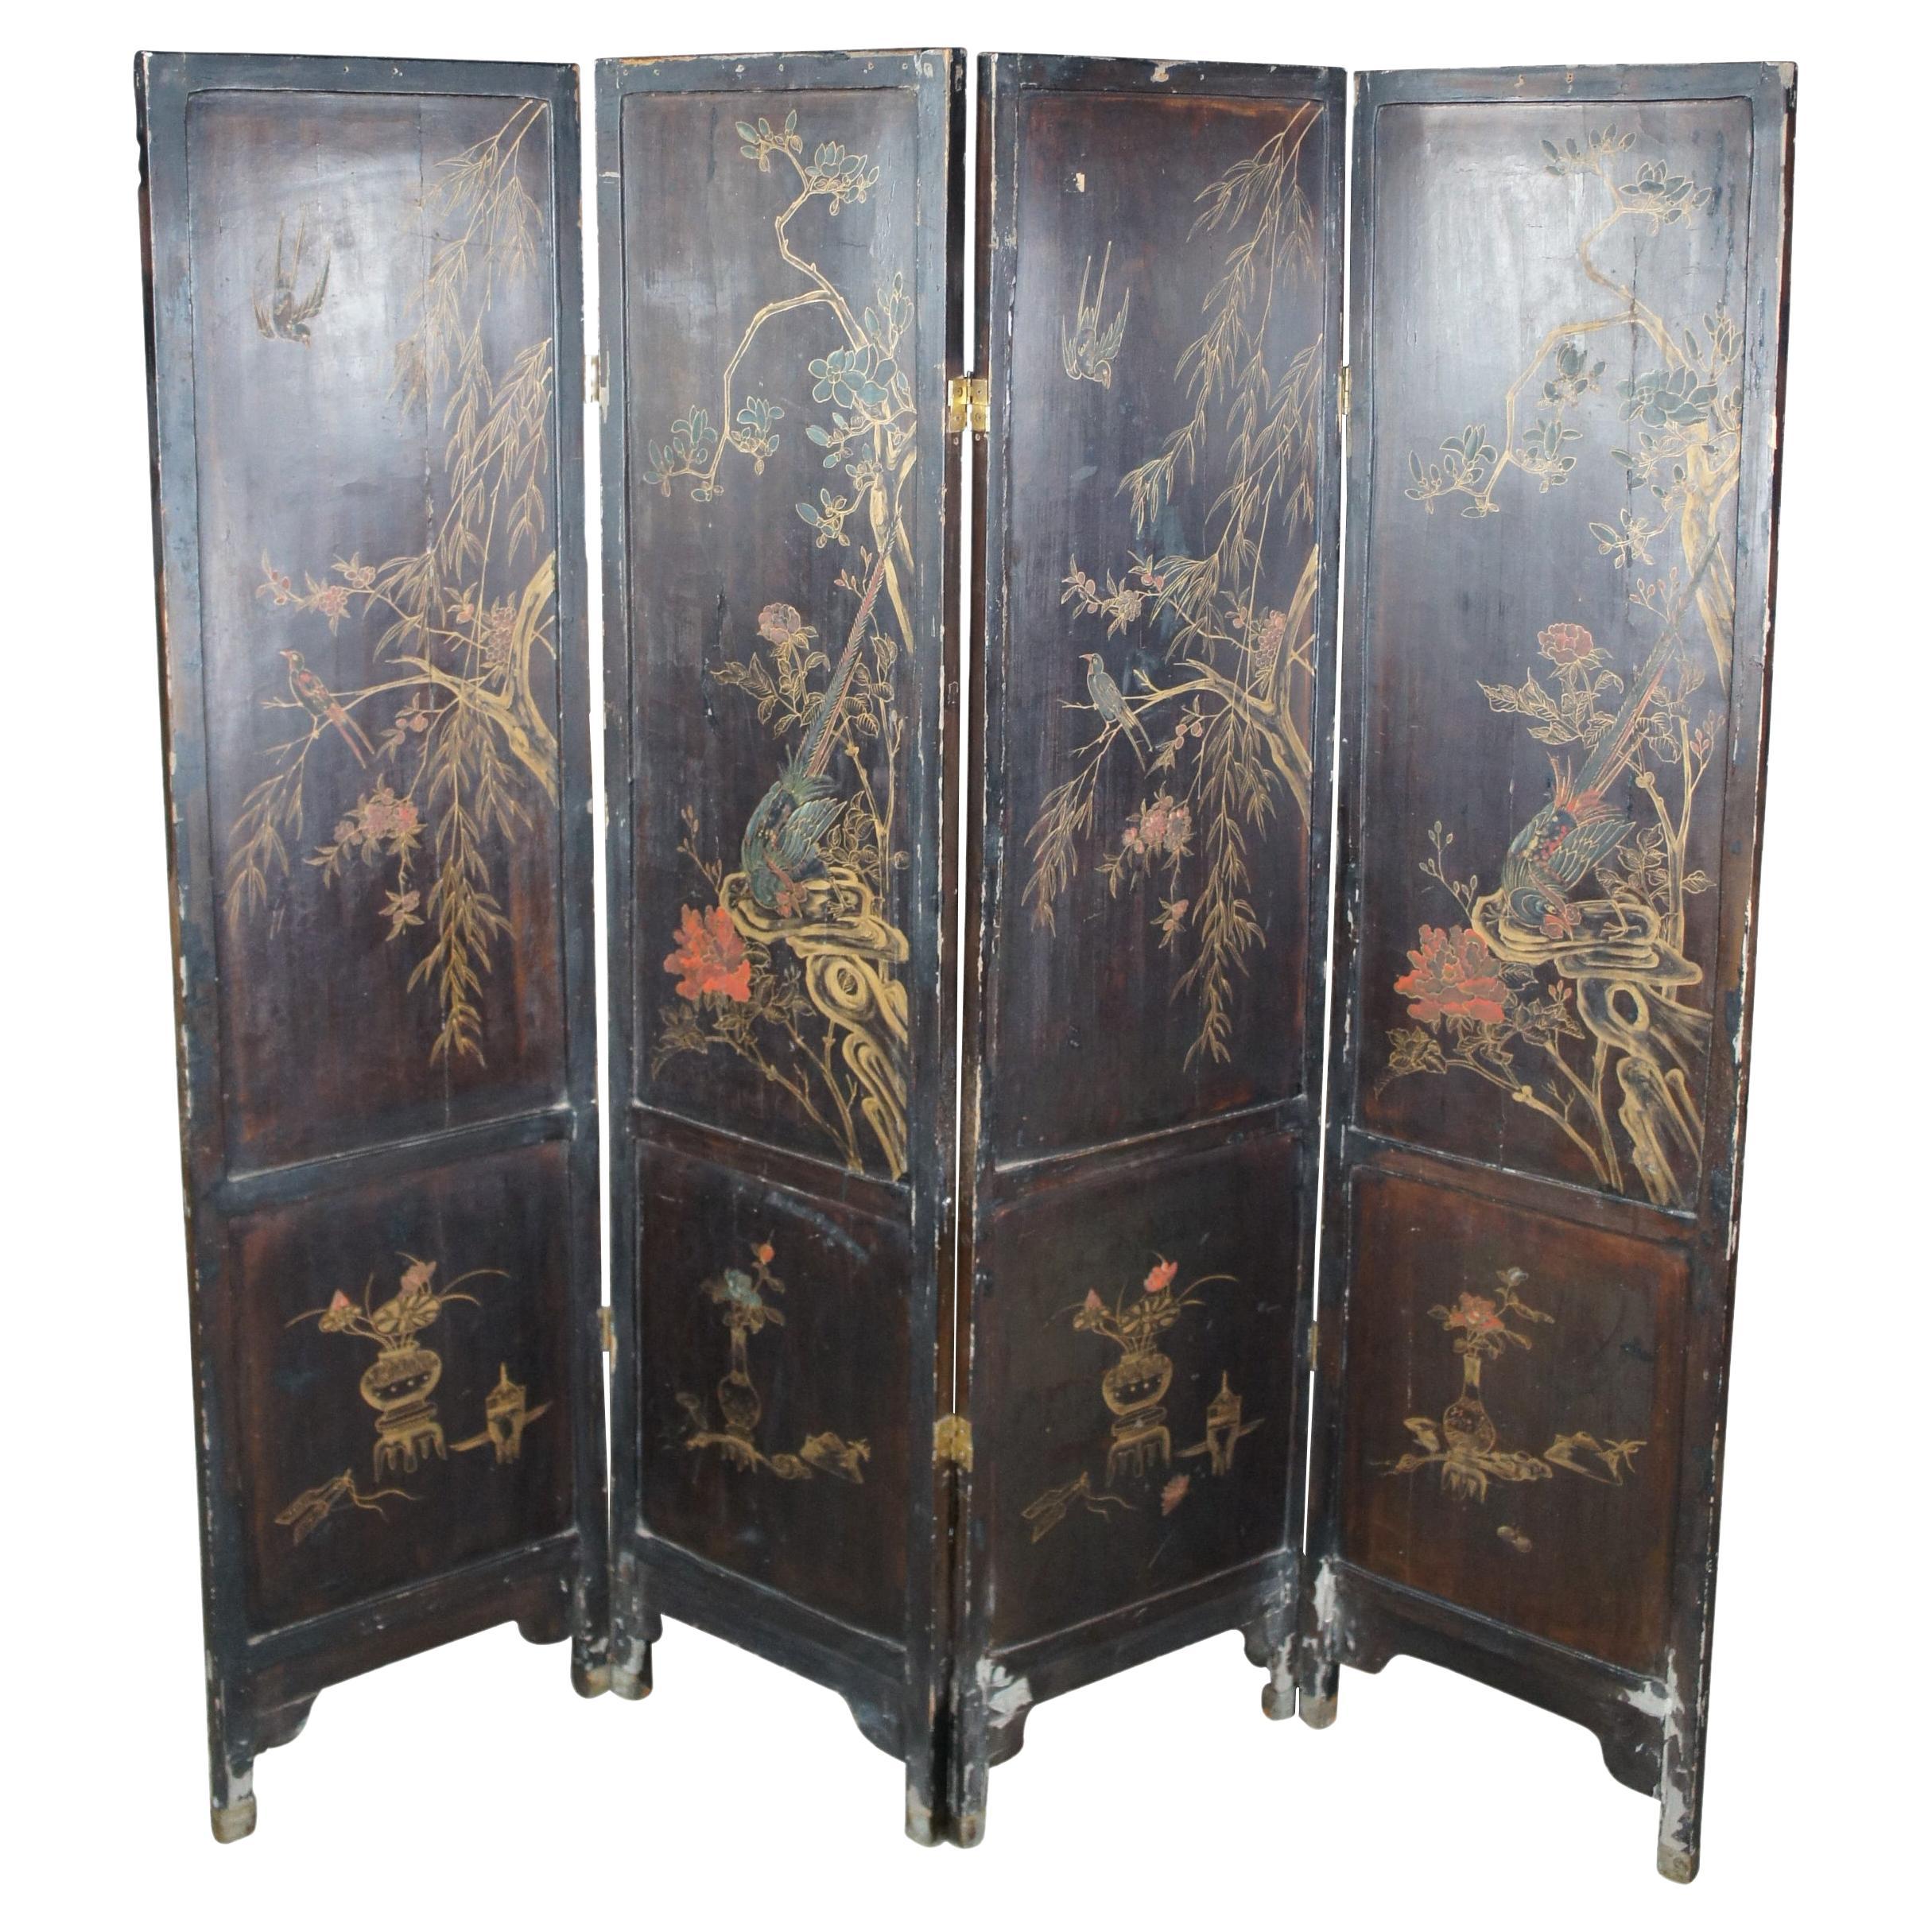 A beautiful early 20th century Chinese Coromandel 4 panel black lacquer room divider. One side Features a Chinese village and river landscape with applied and carved bovine over a gold painted backing.  A pagoda or temple is at the fore front with